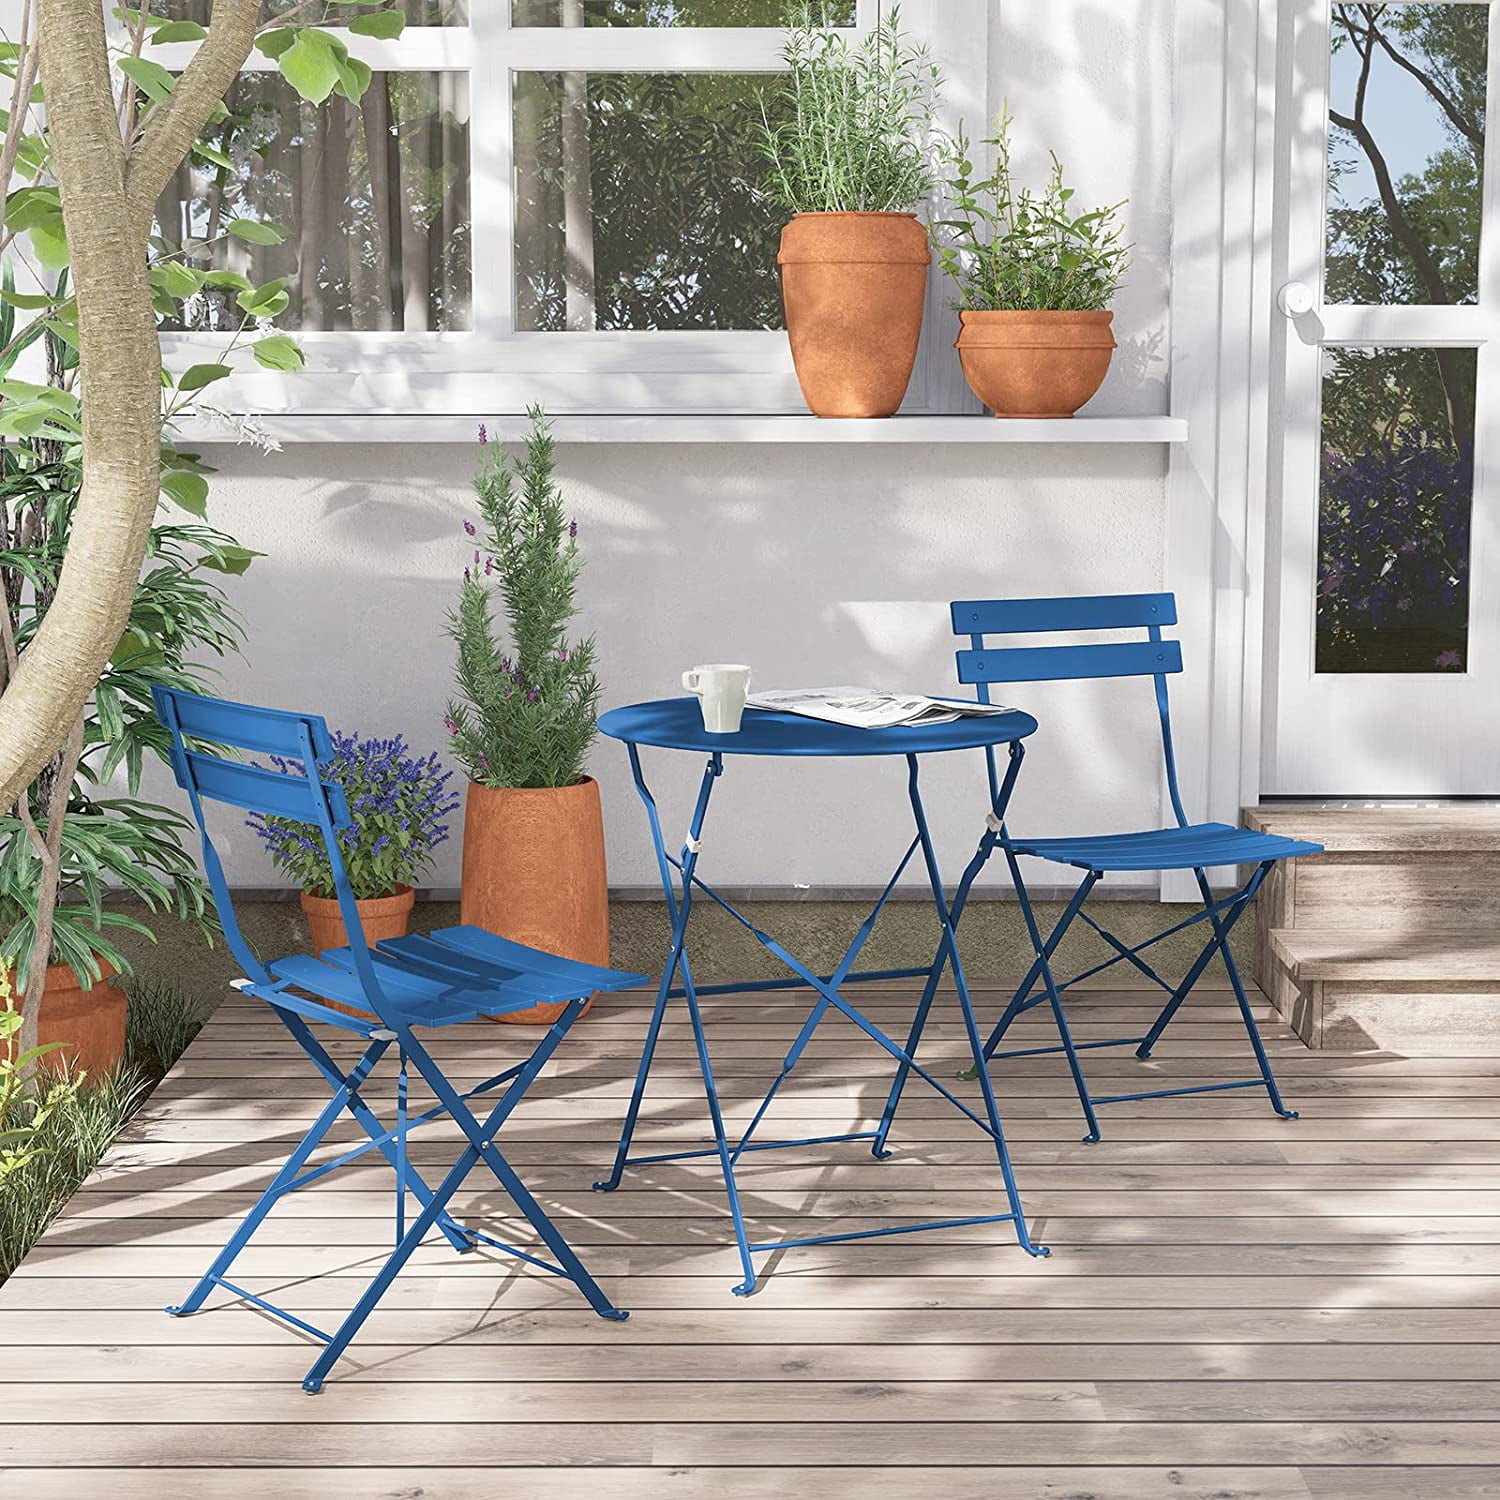 Outdoor Setting 3pc Table Chairs Cafe Patio Garden Set Foldable Steel Seat Blue 